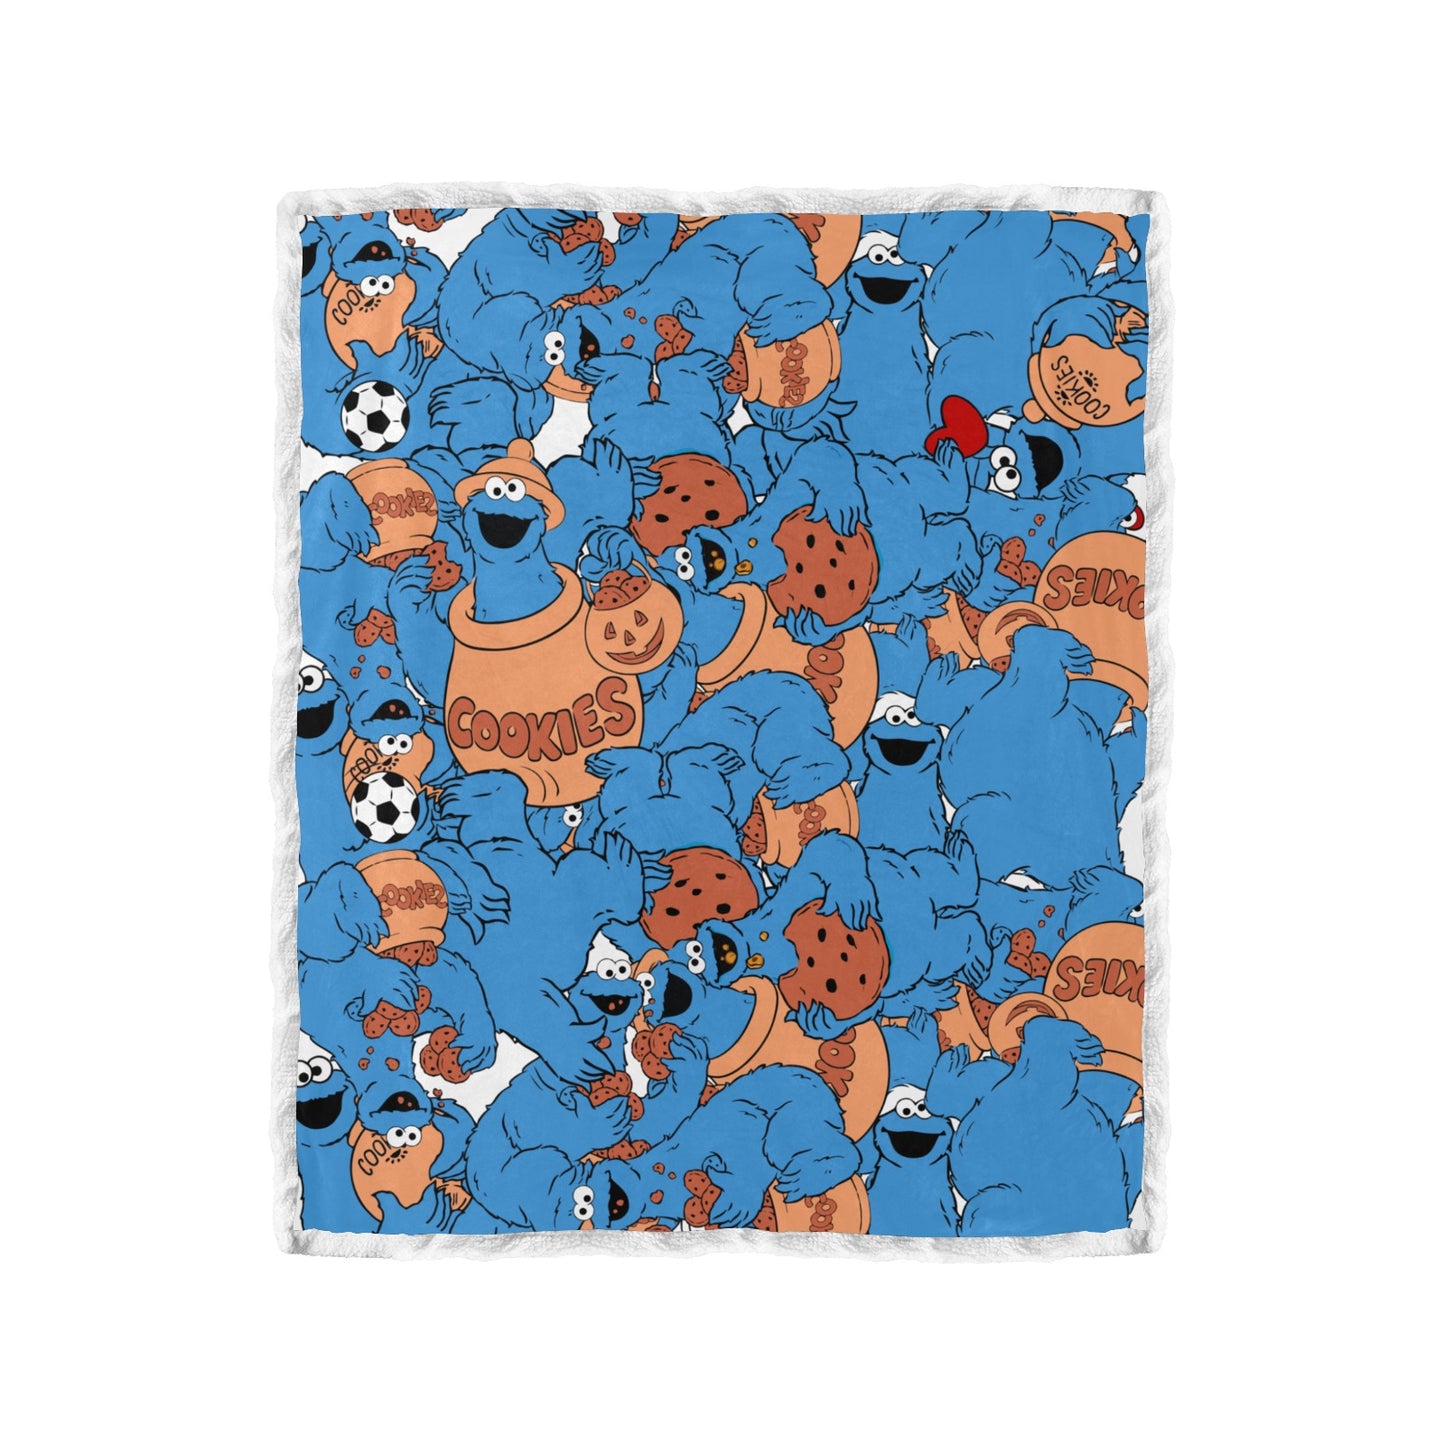 Cookie Monster Double Layer Short Plush Blanket 50"X60" - Double Layer Short Plush Blanket 50"x60" - Zanlana Design and Home Decor